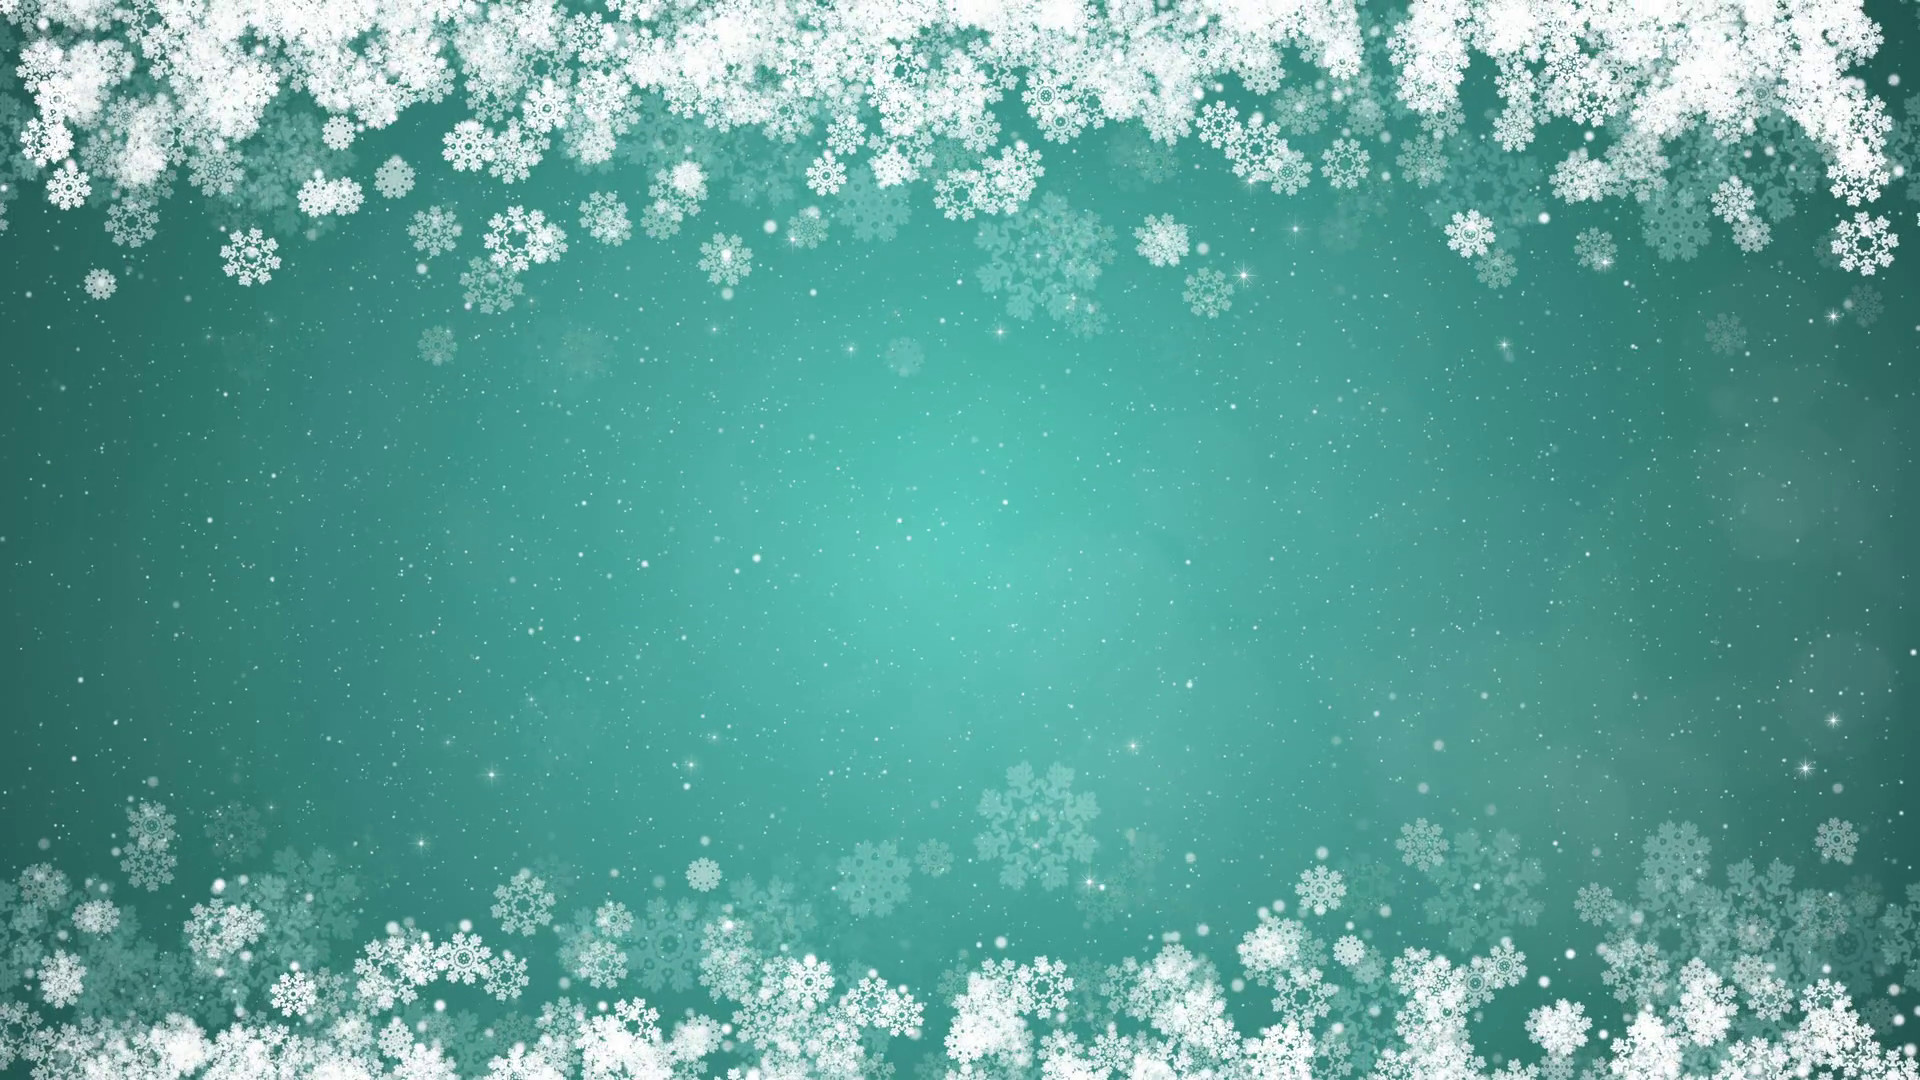 1920x1080 Christmas Background Motion Christmas Frame Winter Card with Glowing  Snowflakes Stars and